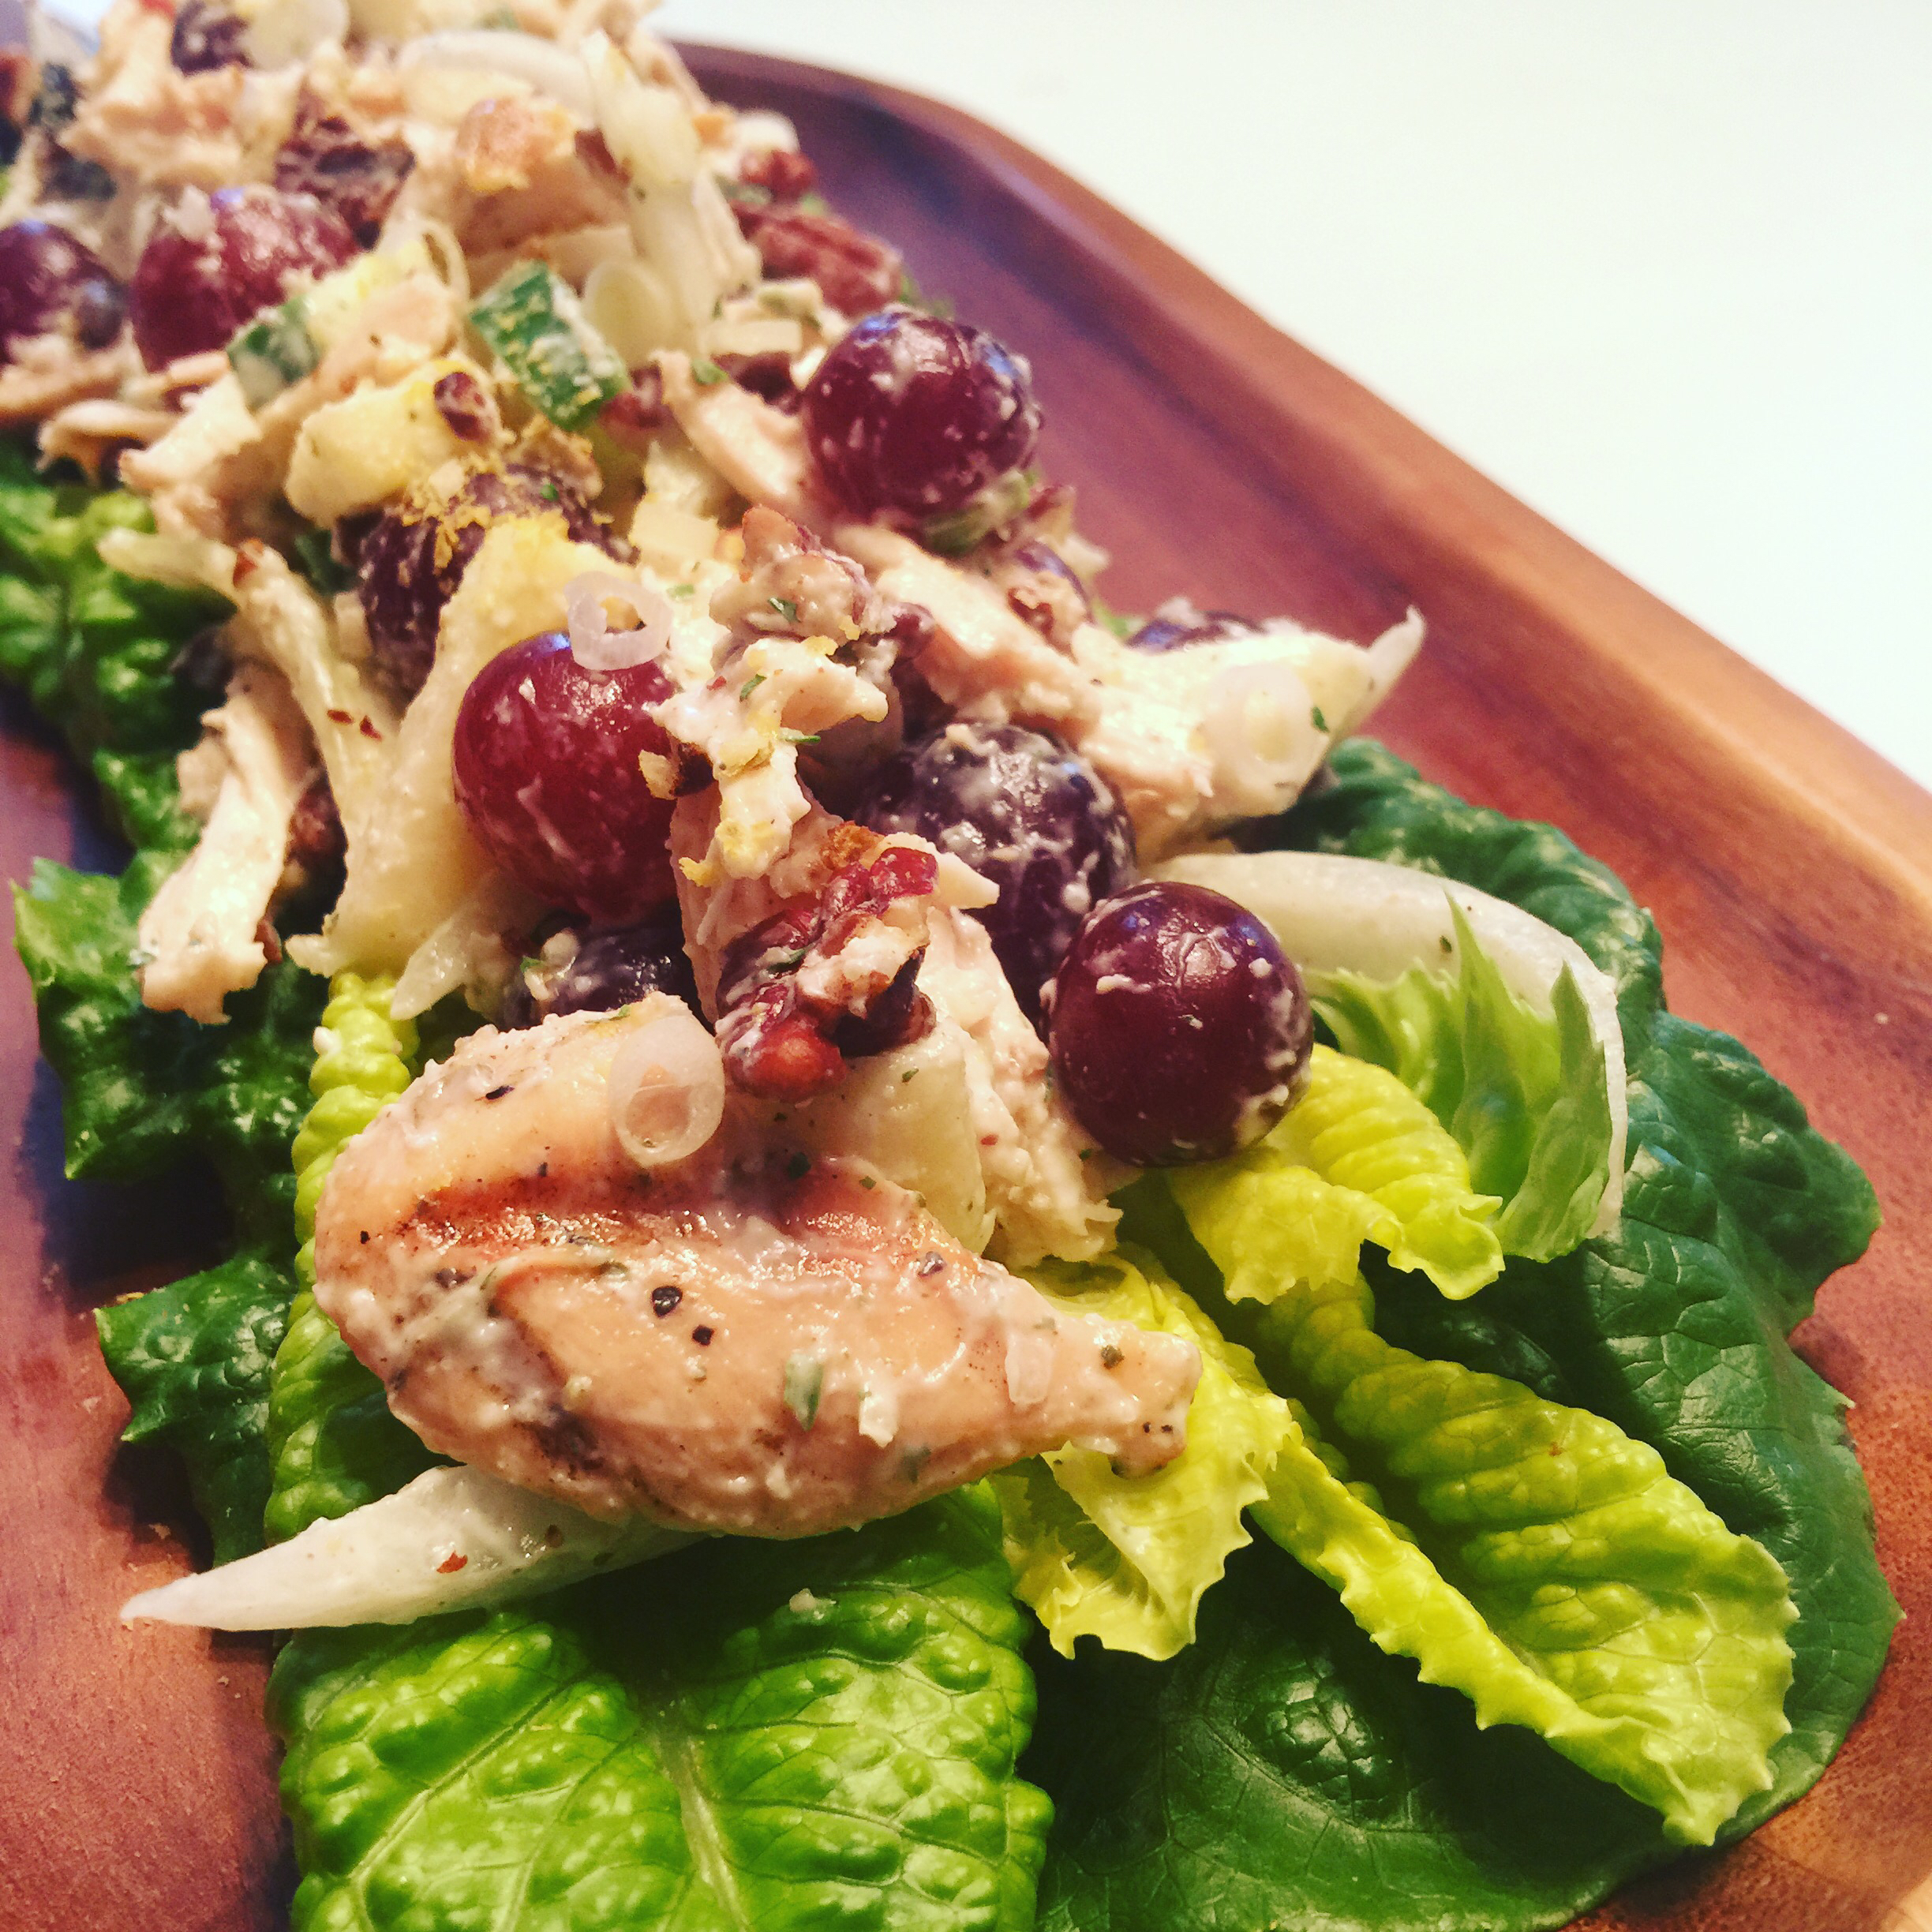 Chicken Salad with Apples, Grapes, and Walnuts